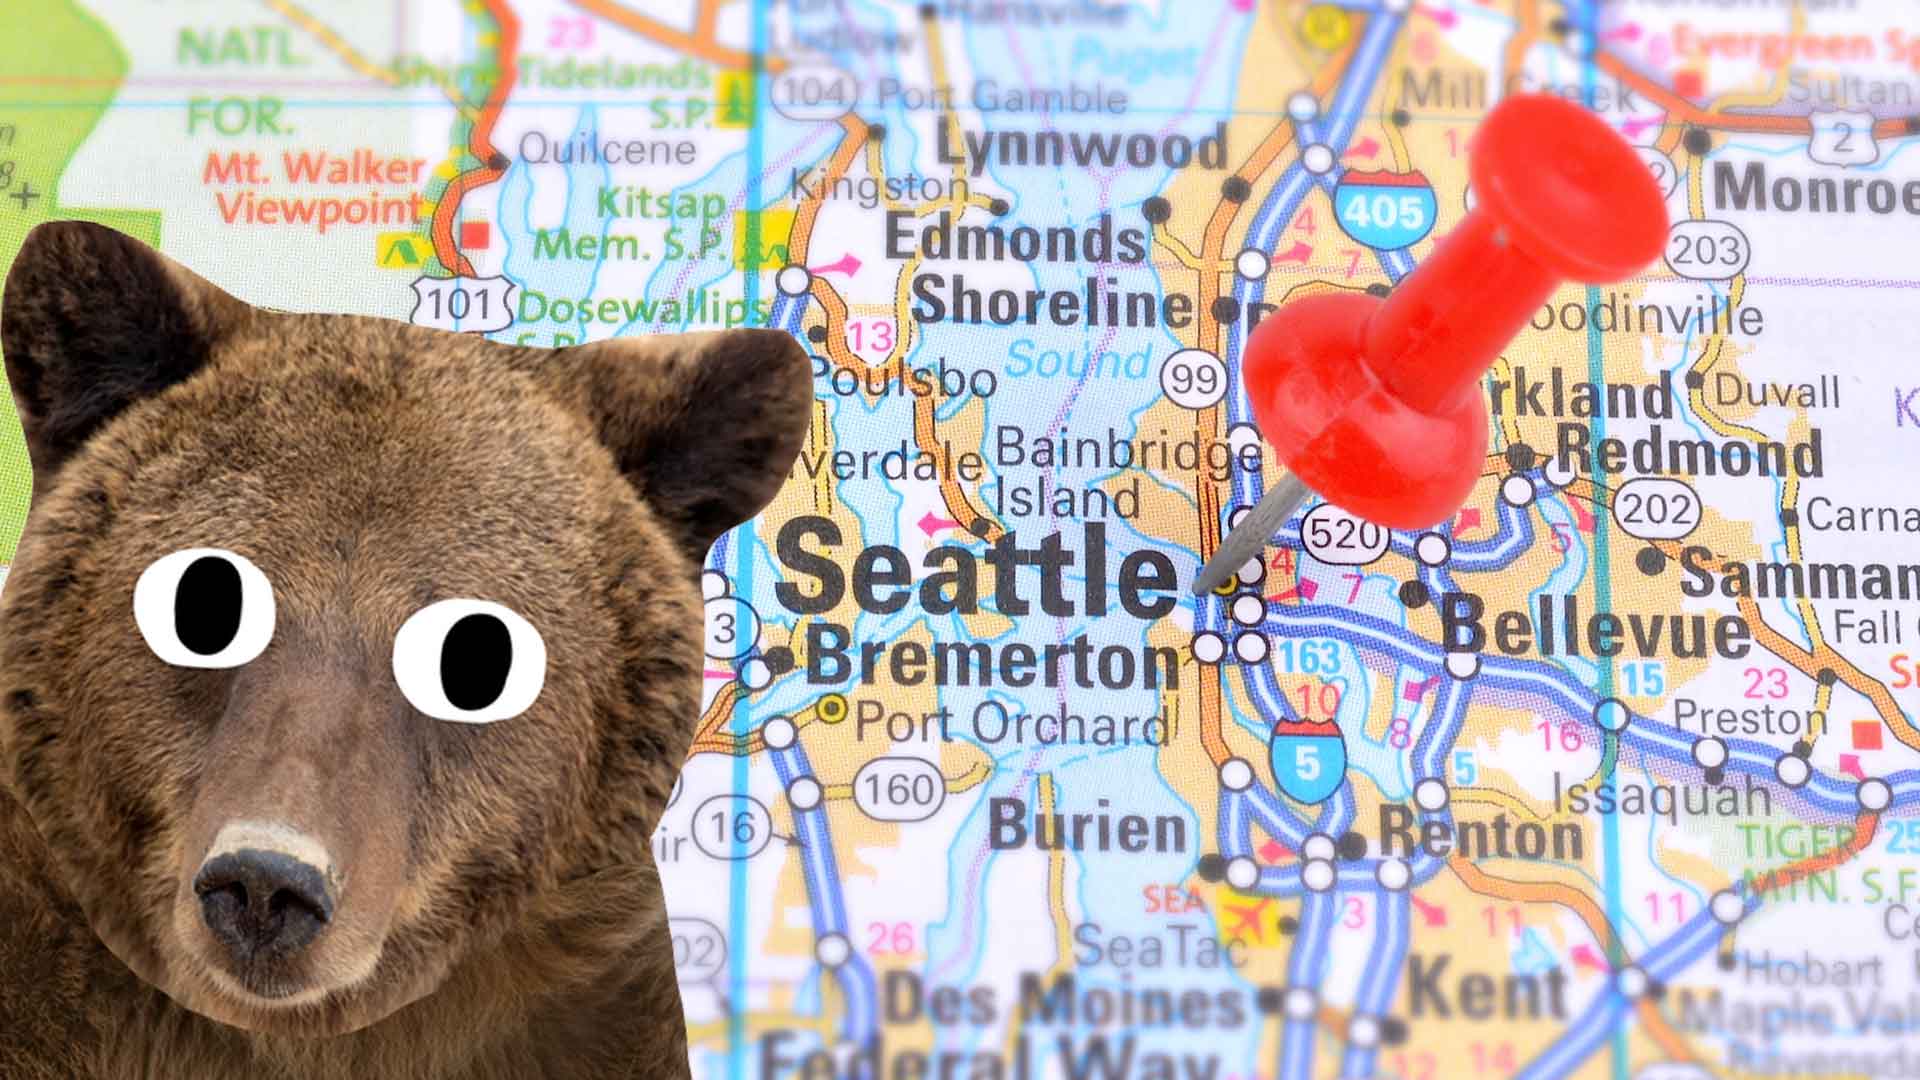 A bear and a map of Seattle